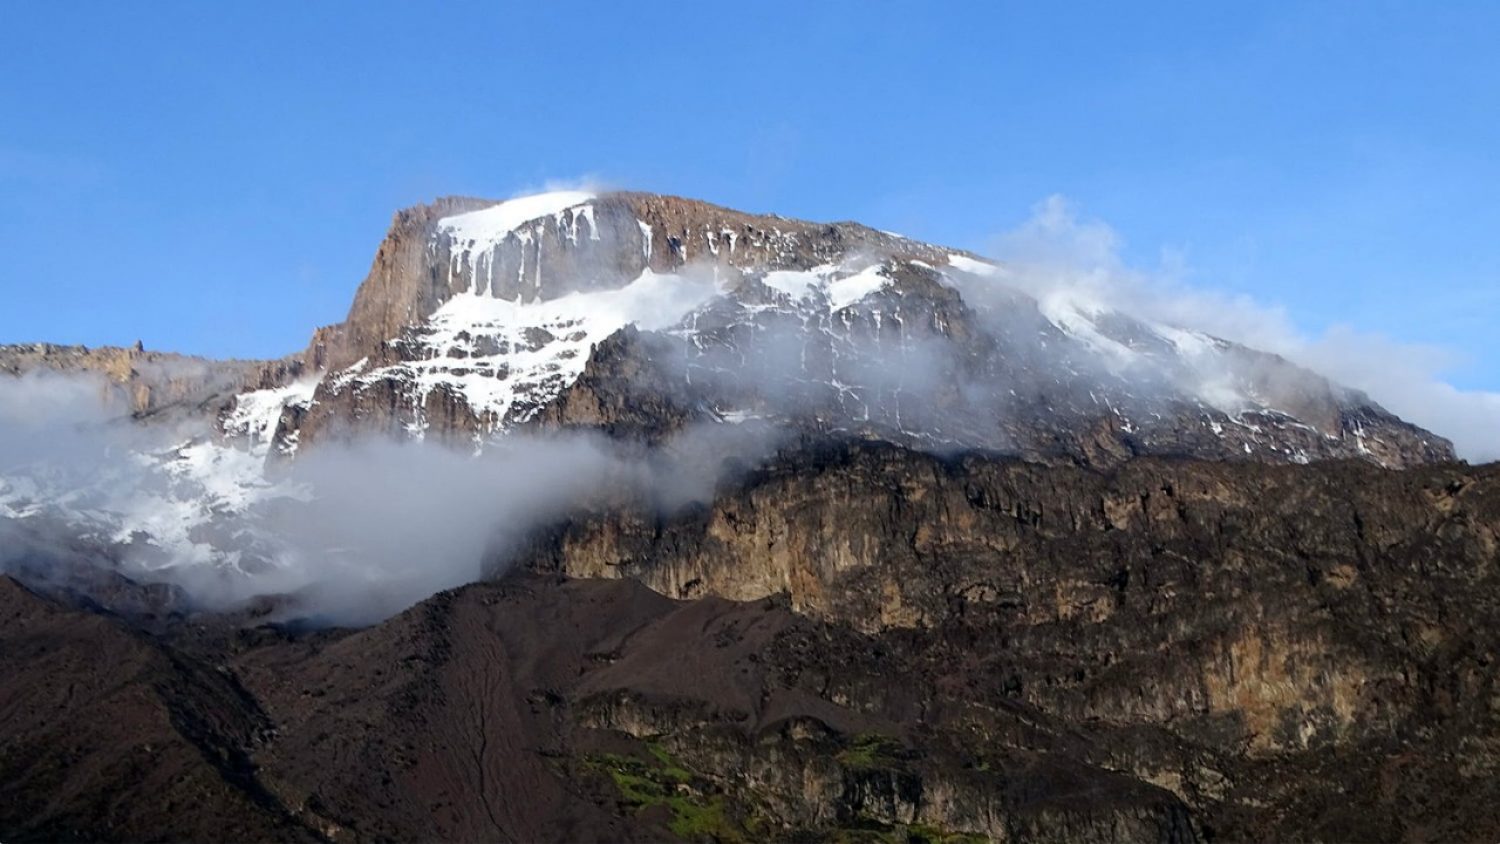 The view from Barranco Camp